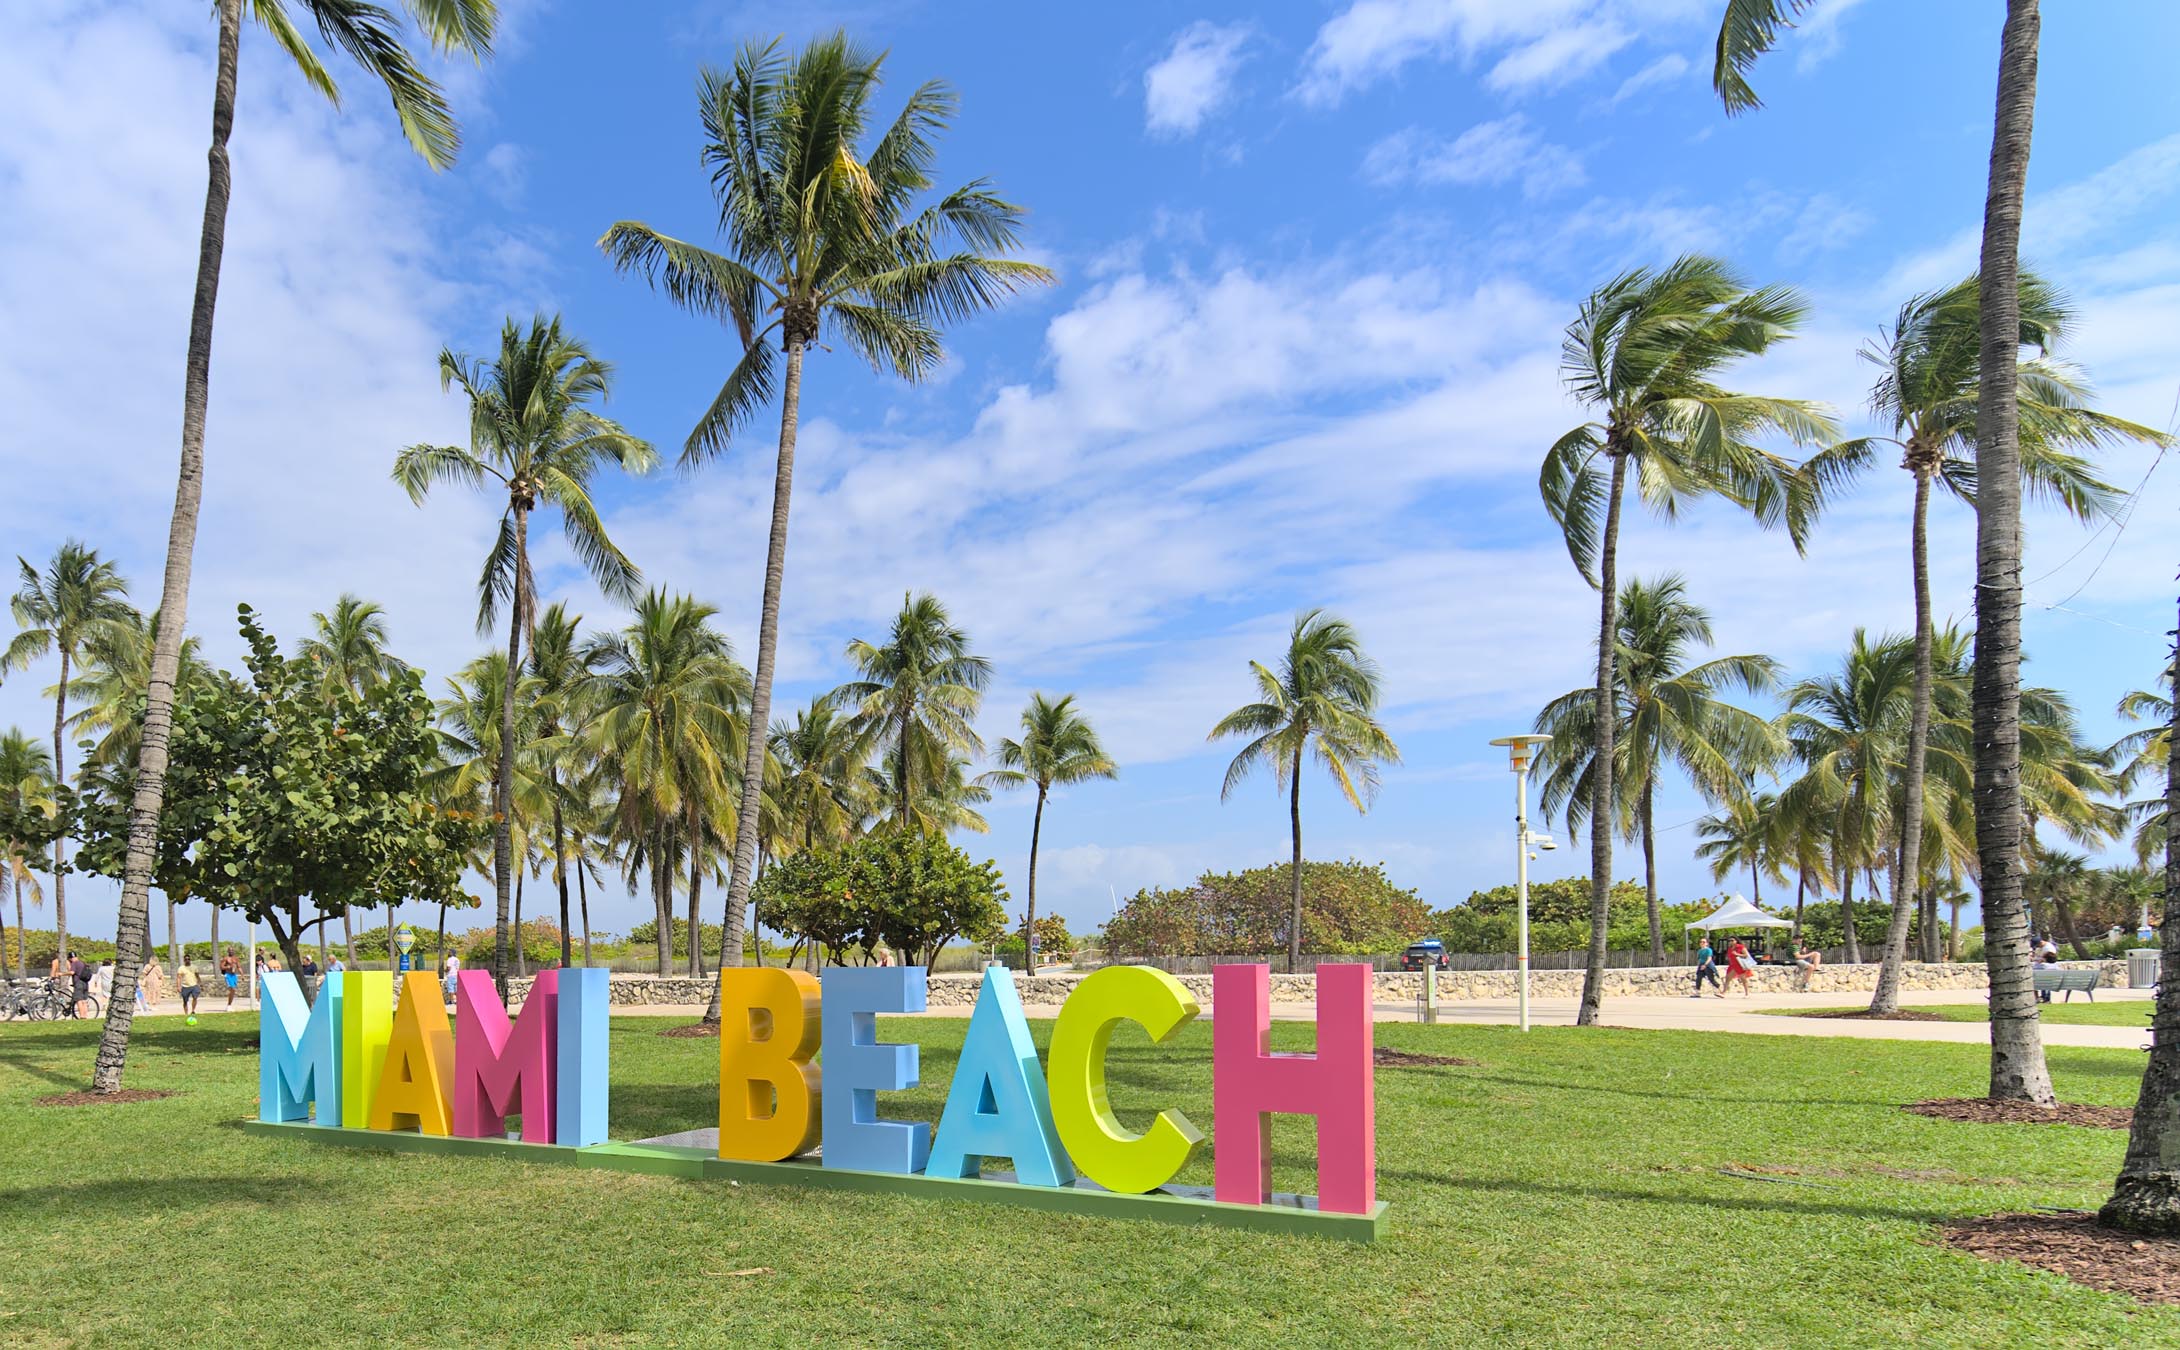 Miami Beach sign with palm trees